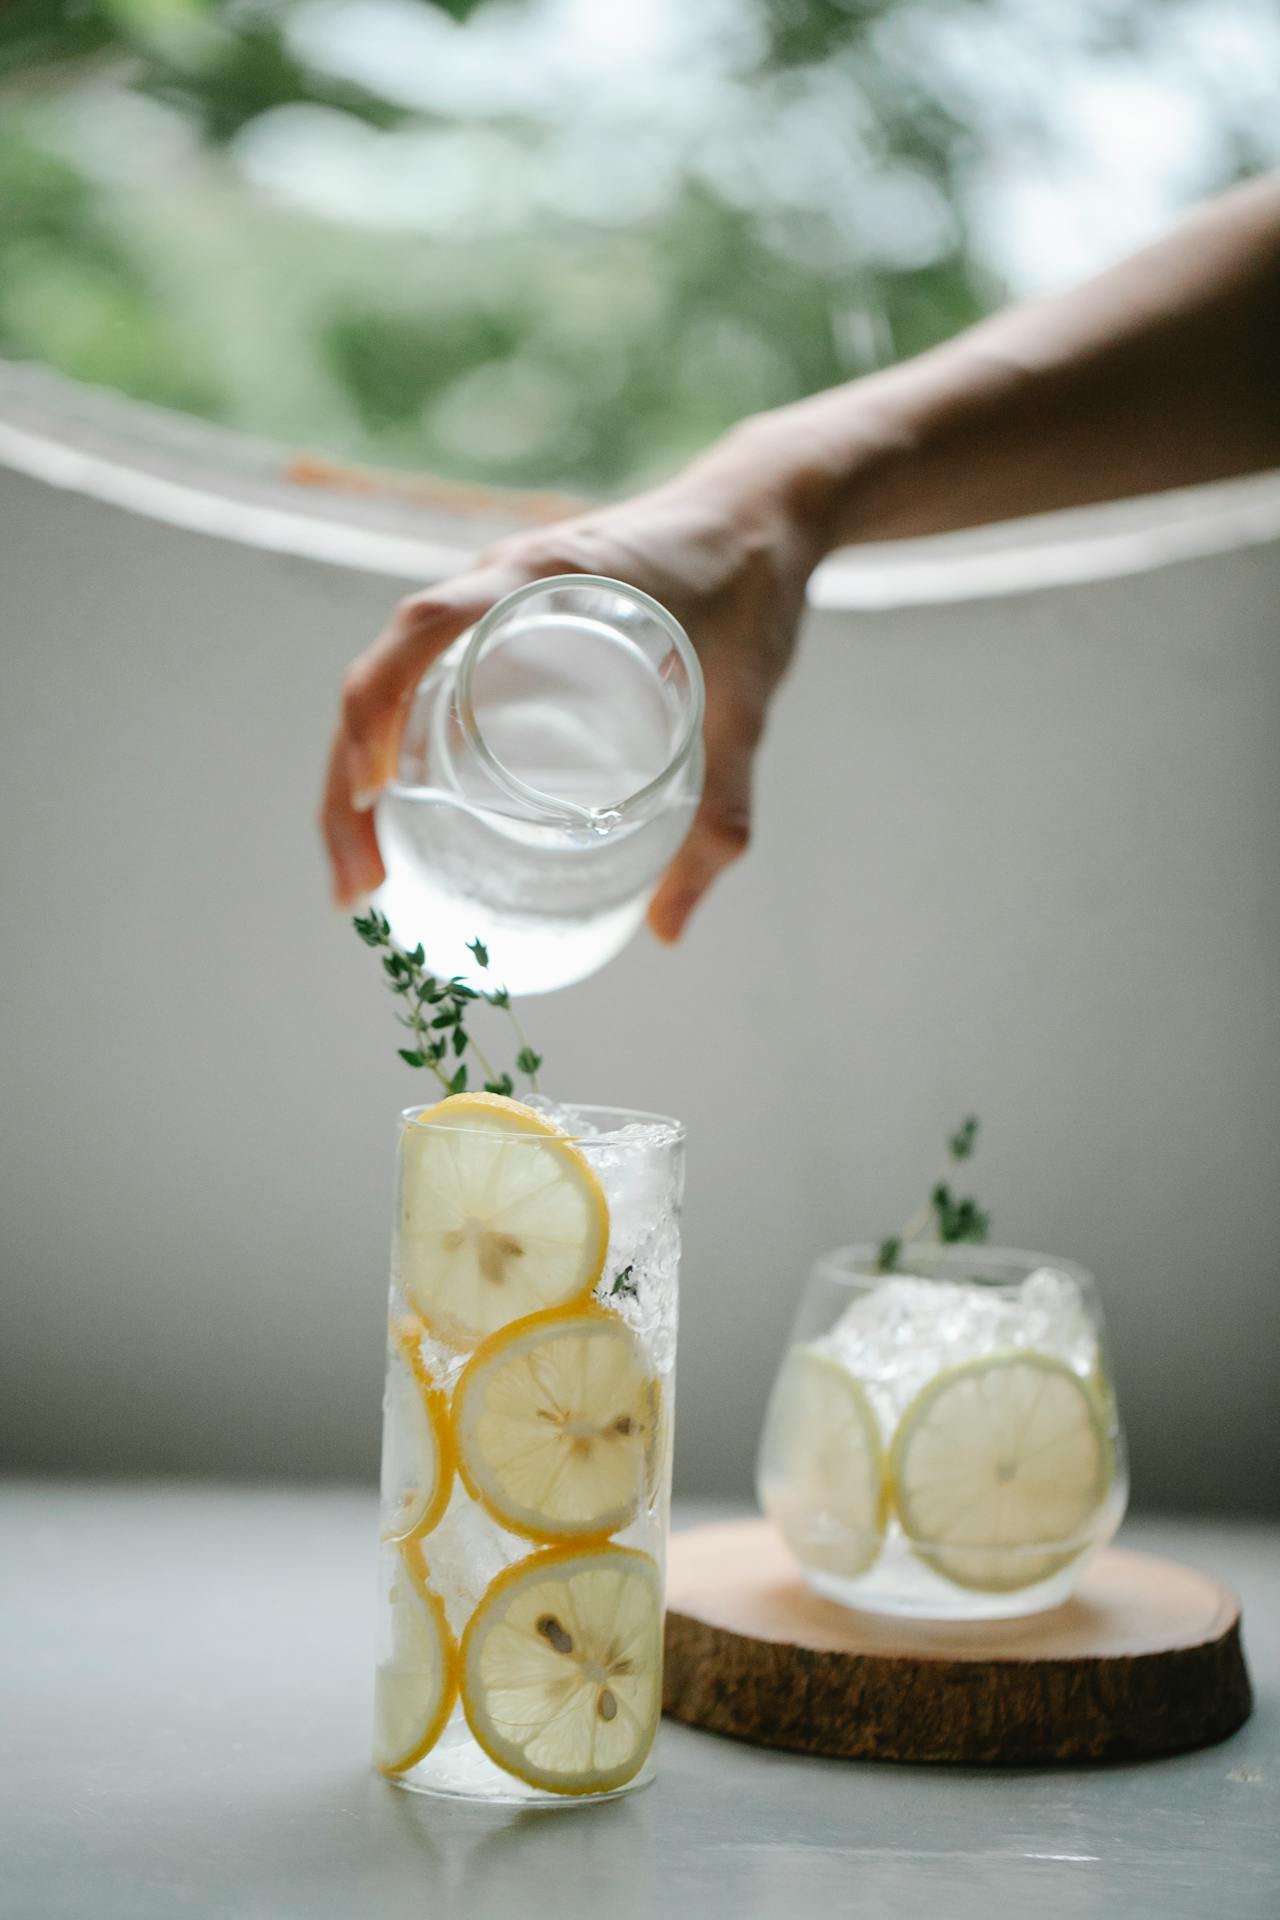 What Are the Benefits of Drinking Detox Water? Here’s How You Make It